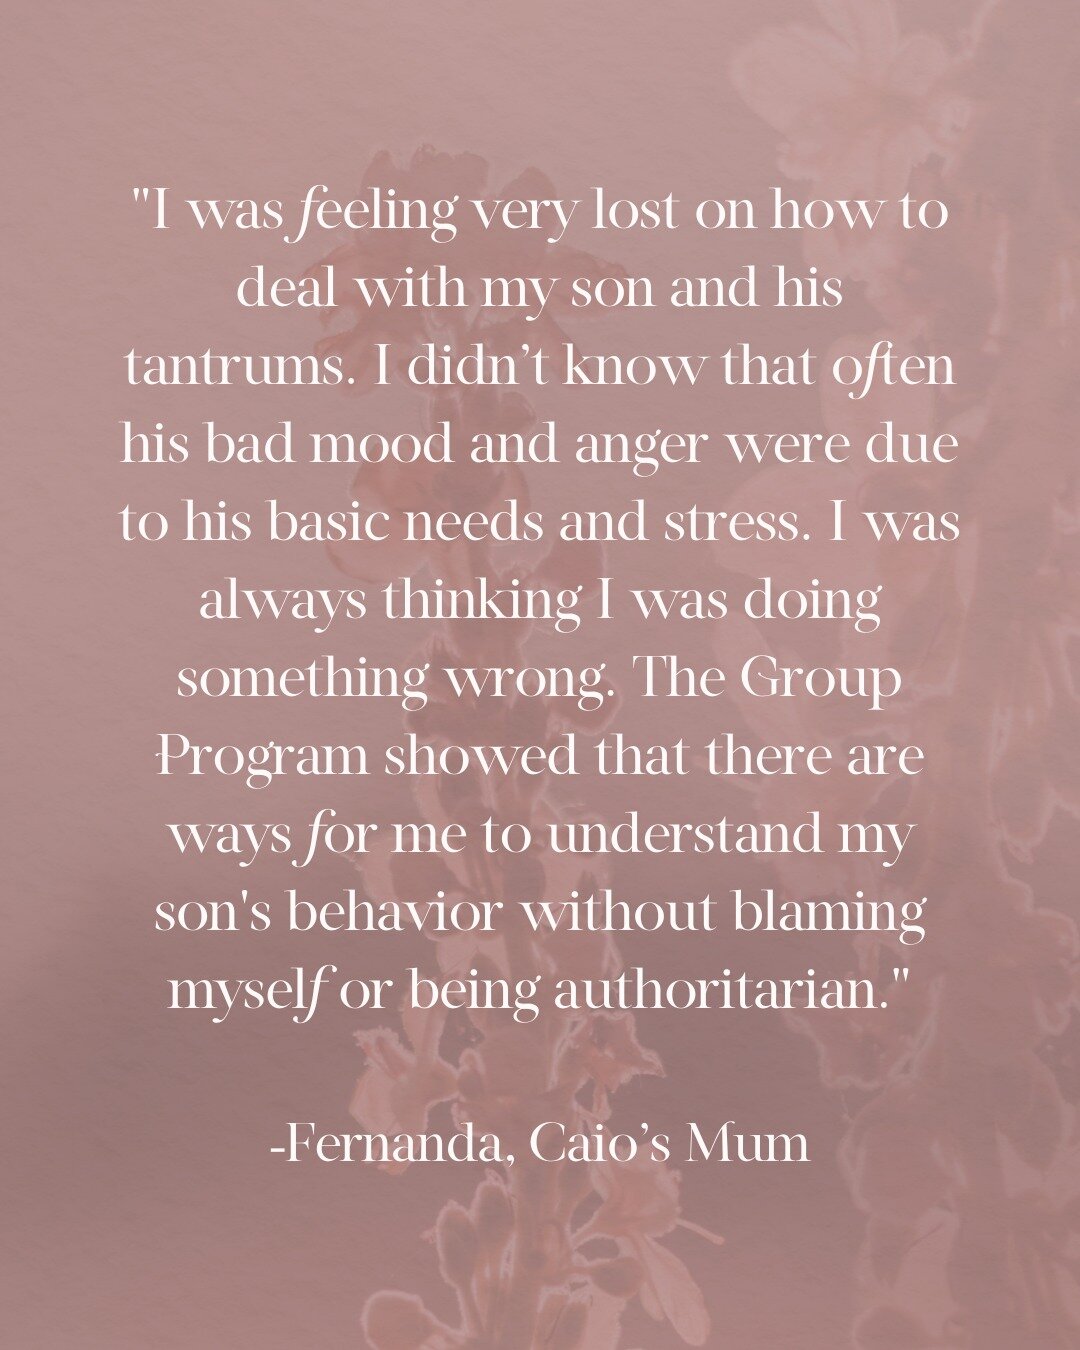 🌟 Testimonial Spotlight: Fernanda, Caio&rsquo;s Mum 🌟

Fernanda's words resonates with the core principles of our program. In Week 3, we delve into the reasons behind our children's challenging behavior, emphasizing the importance of understanding 